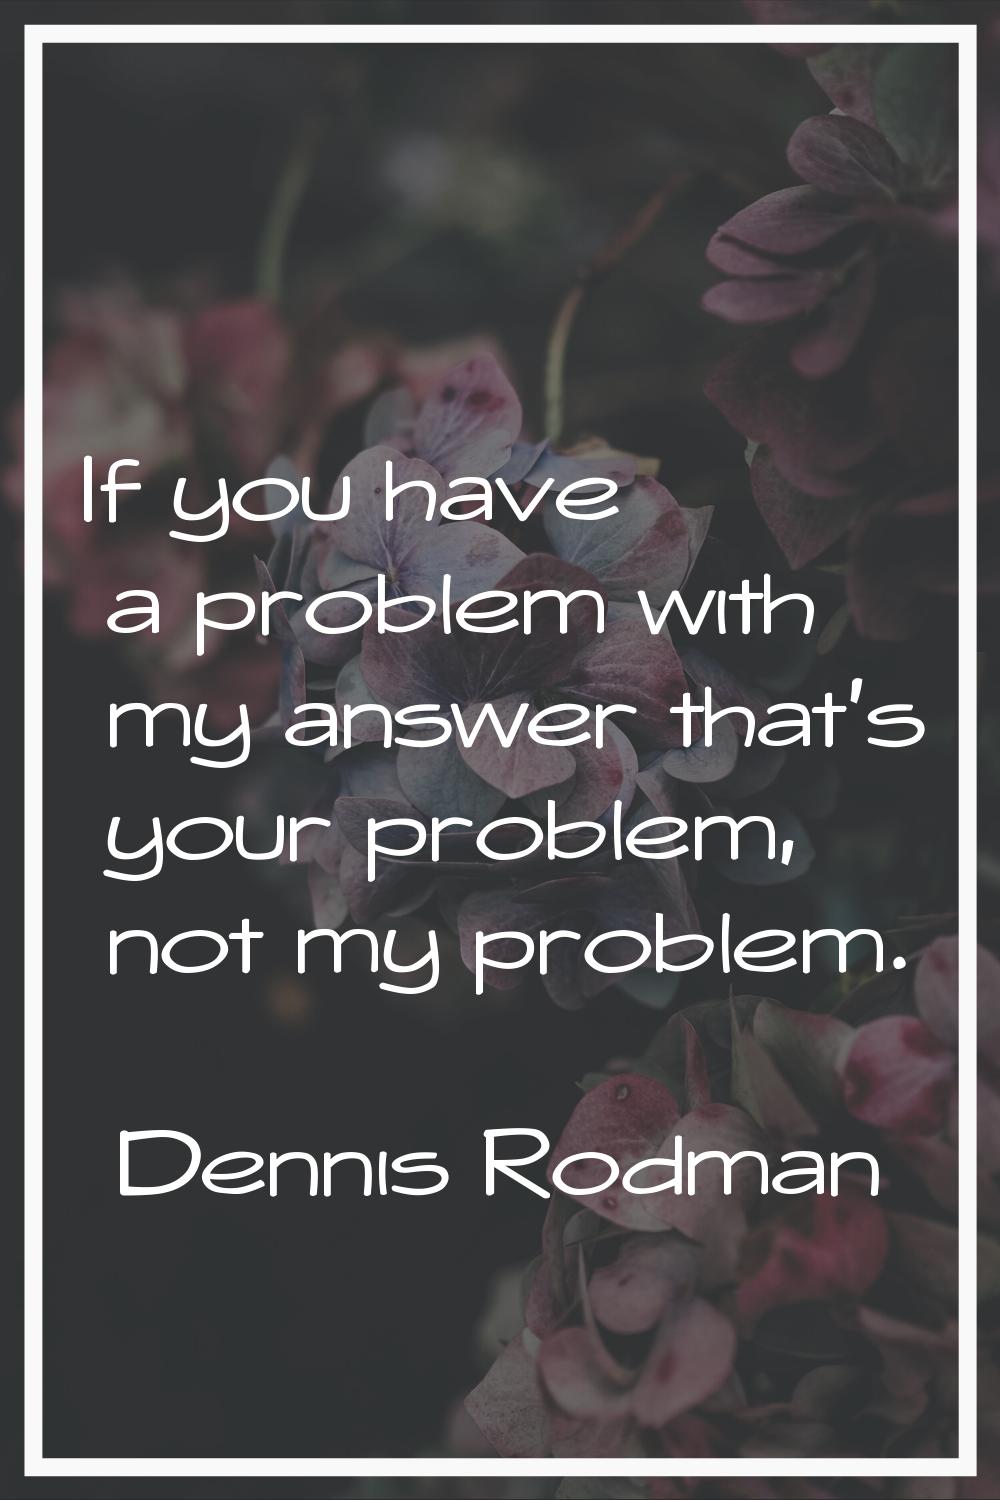 If you have a problem with my answer that's your problem, not my problem.